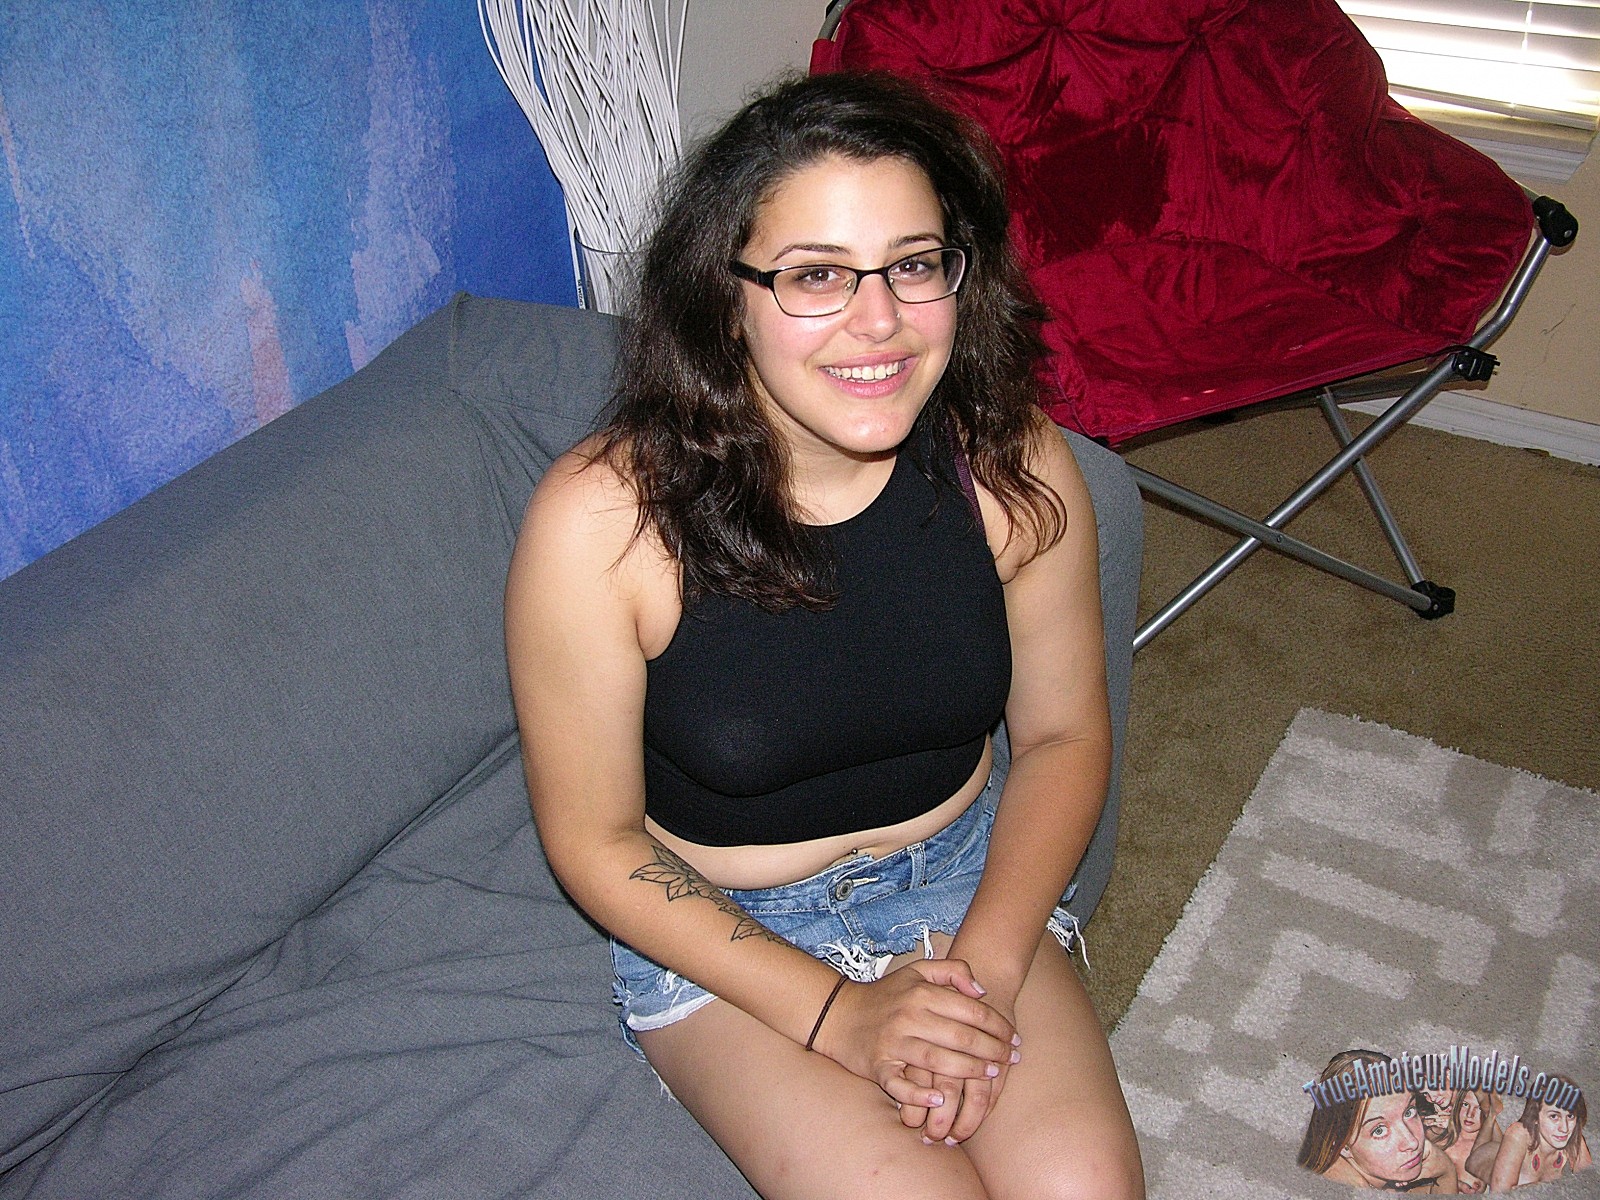 Amateur Brunette Chubby Glasses Wearing Girl picture